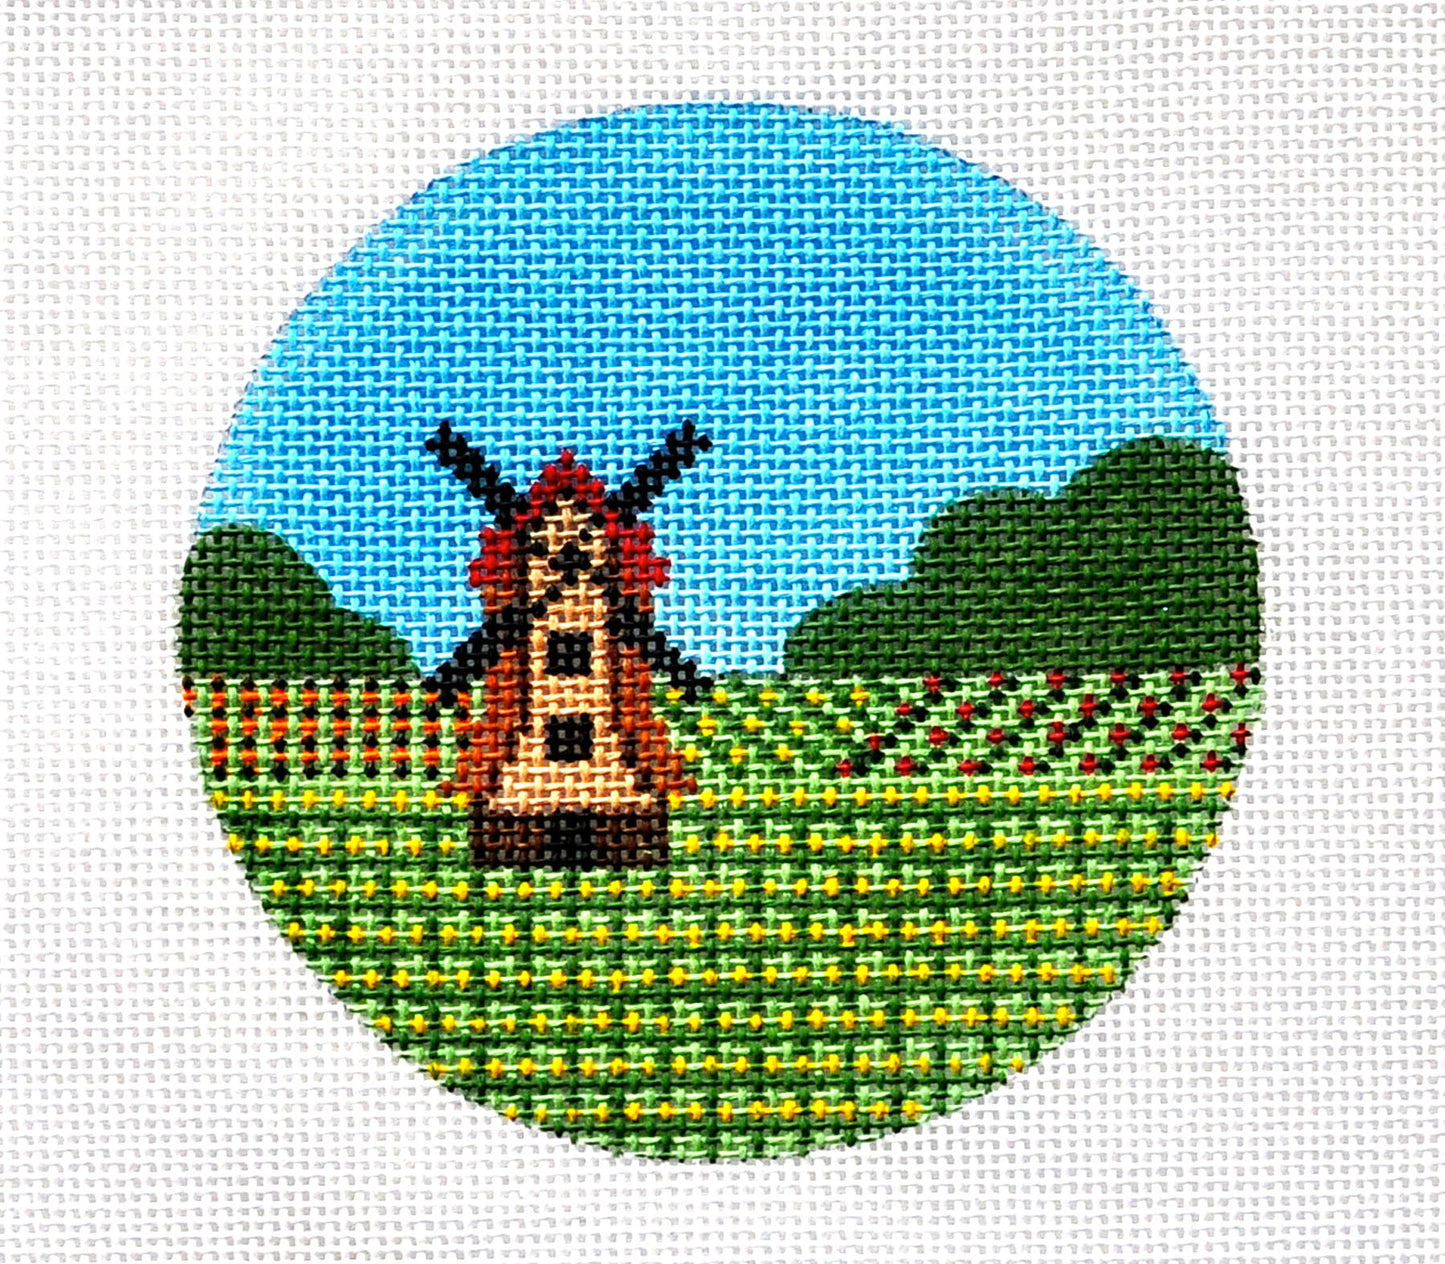 Round~4" Holland~ Destination round handpainted Needlepoint Canvas~by Painted Pony  **MAY NEED TO BE SPECIAL ORDERED**